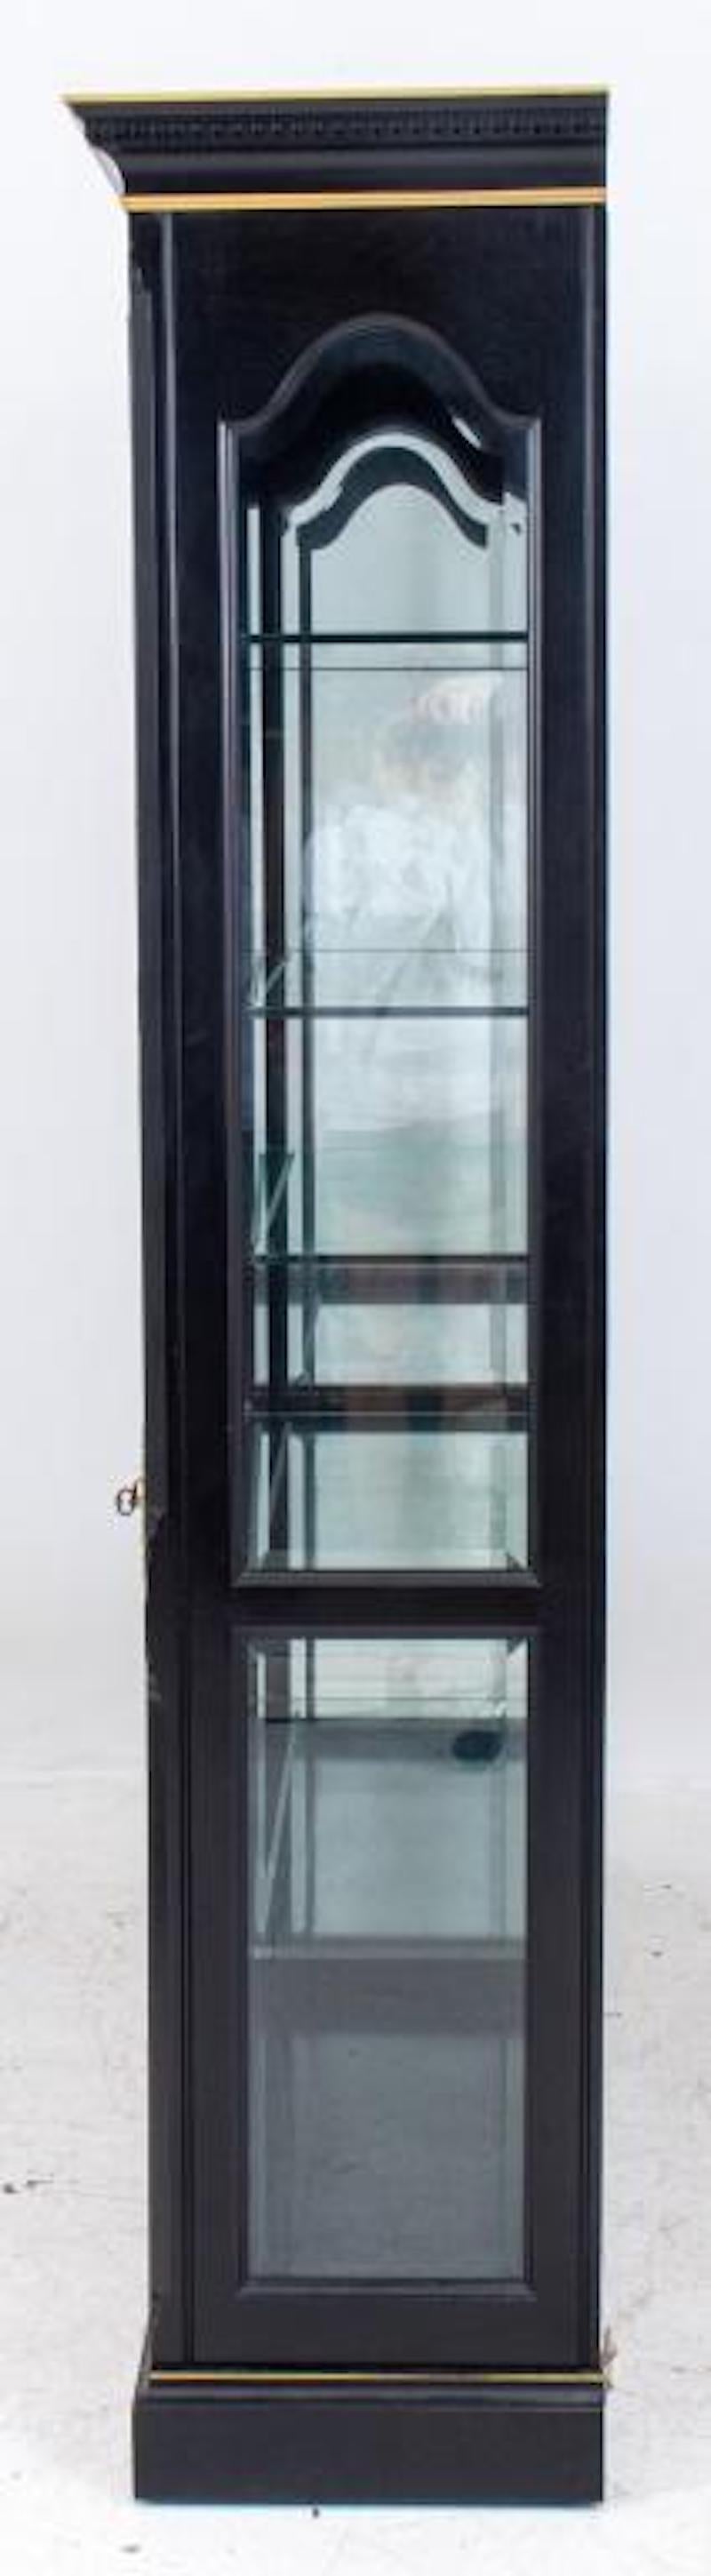 Mid-20th Century  Chinoiserie Display Cabinet / Hand Gilt Black Lacquered Wood Vitrine For Sale